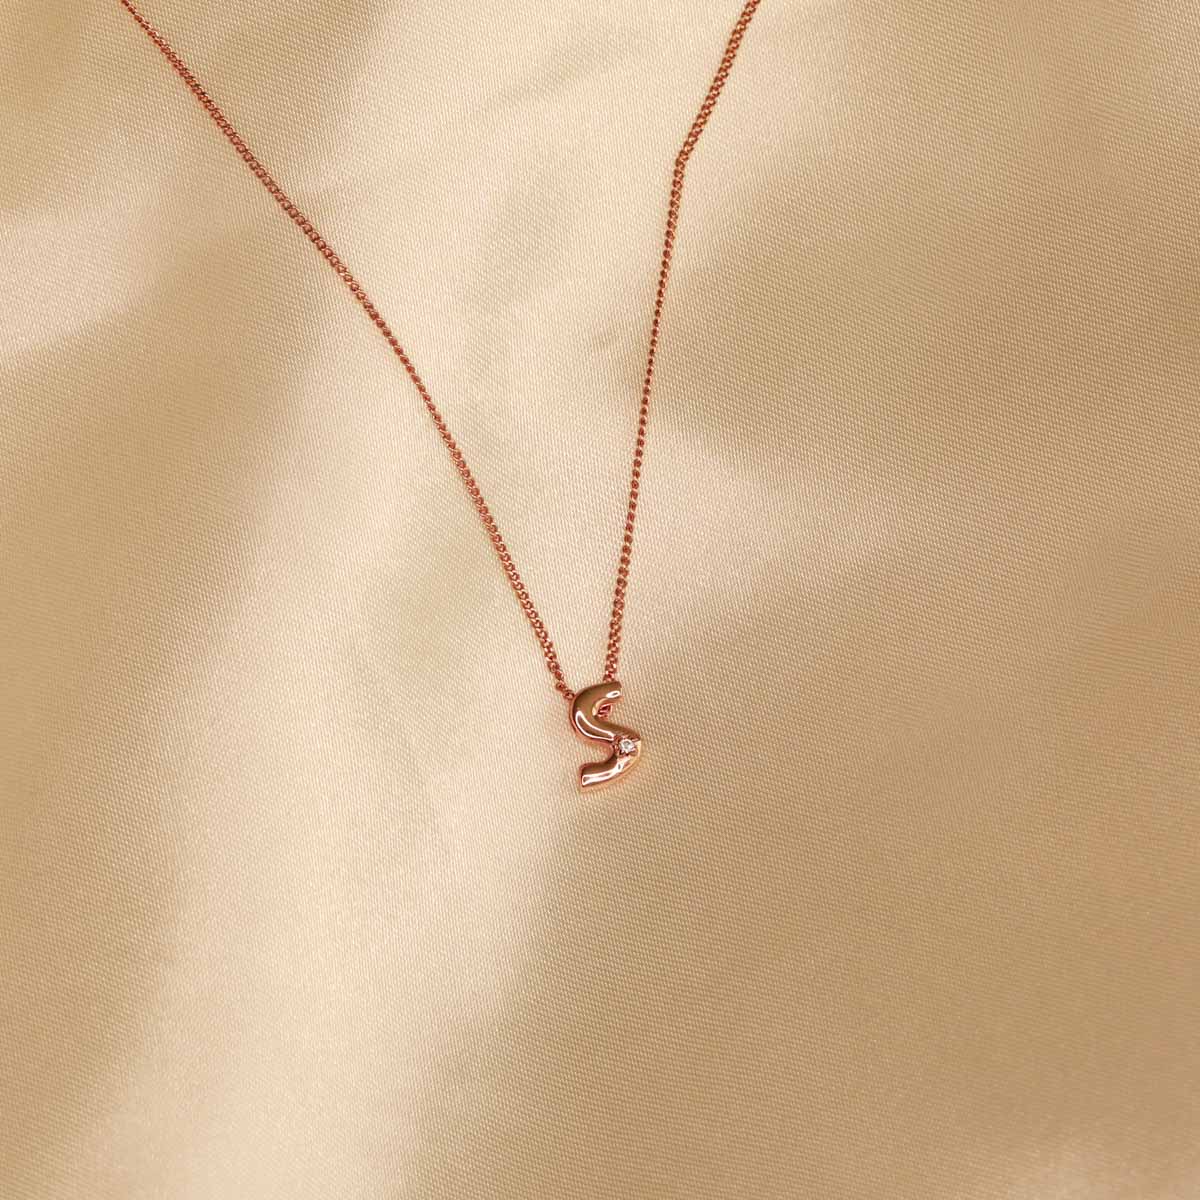 Flat lay shot of S Initial Pendant Necklace in Rose Gold